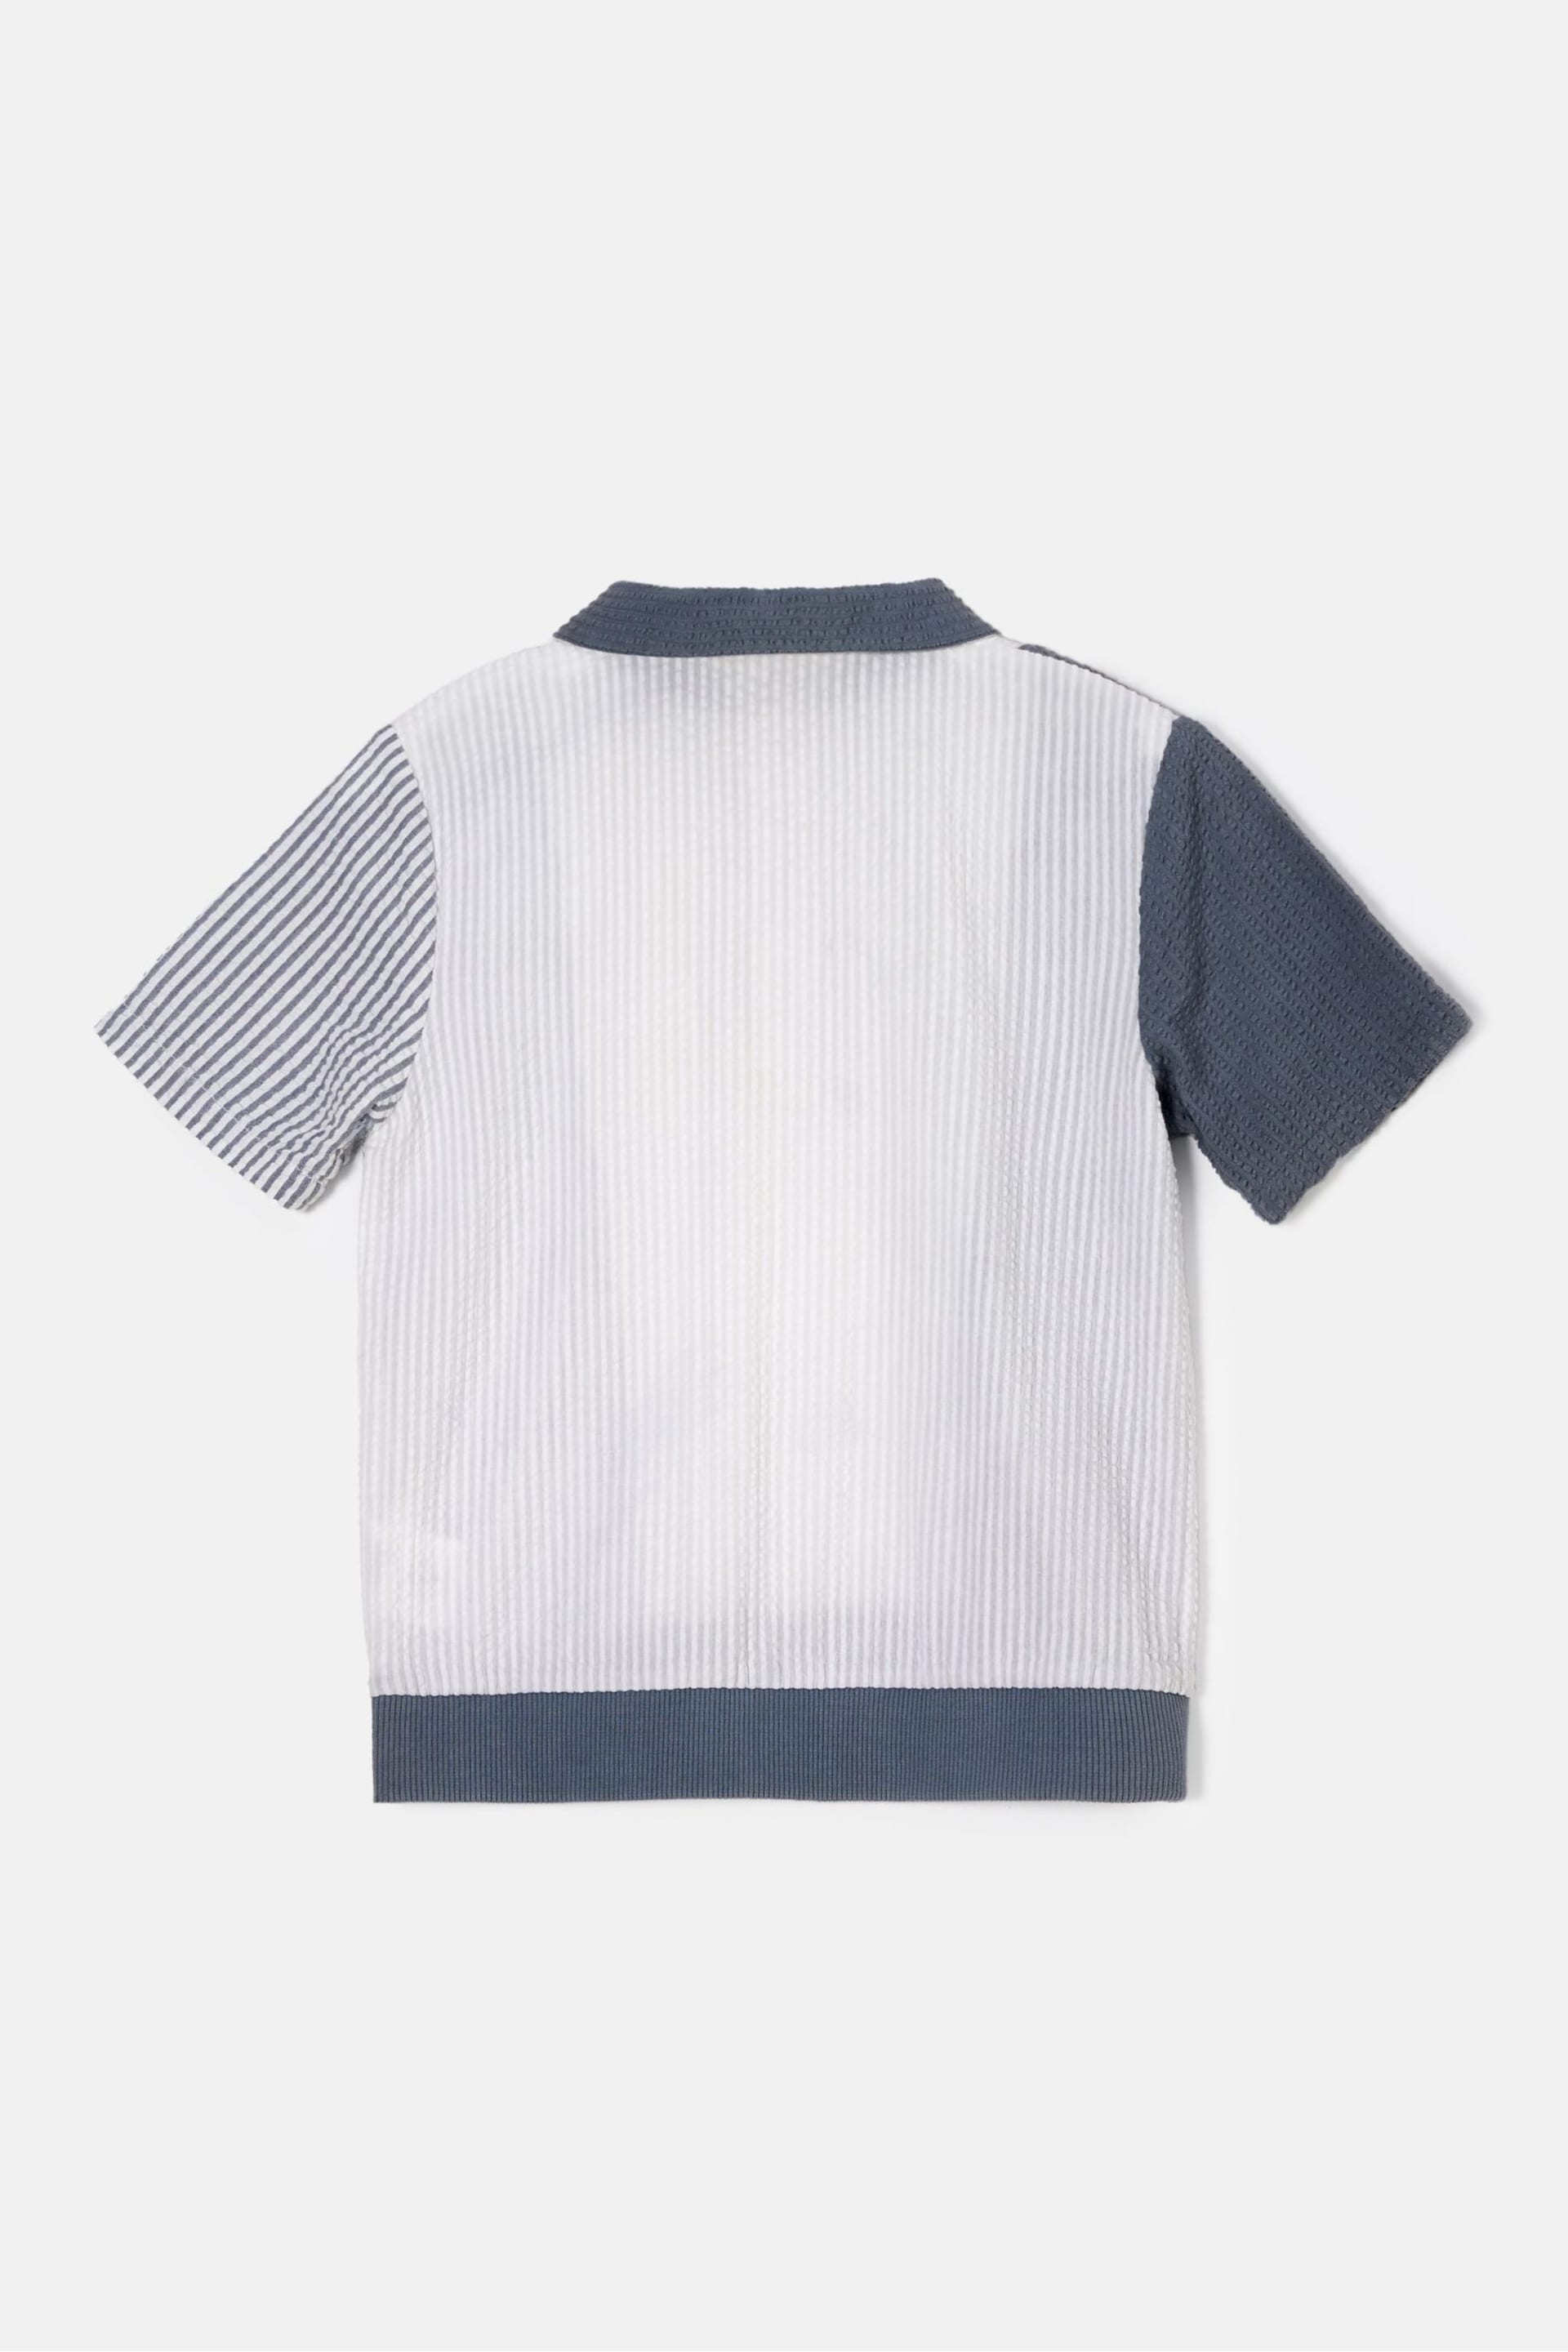 Angel & Rocket Blue Timmy Textured Polo Shirt - Image 5 of 6